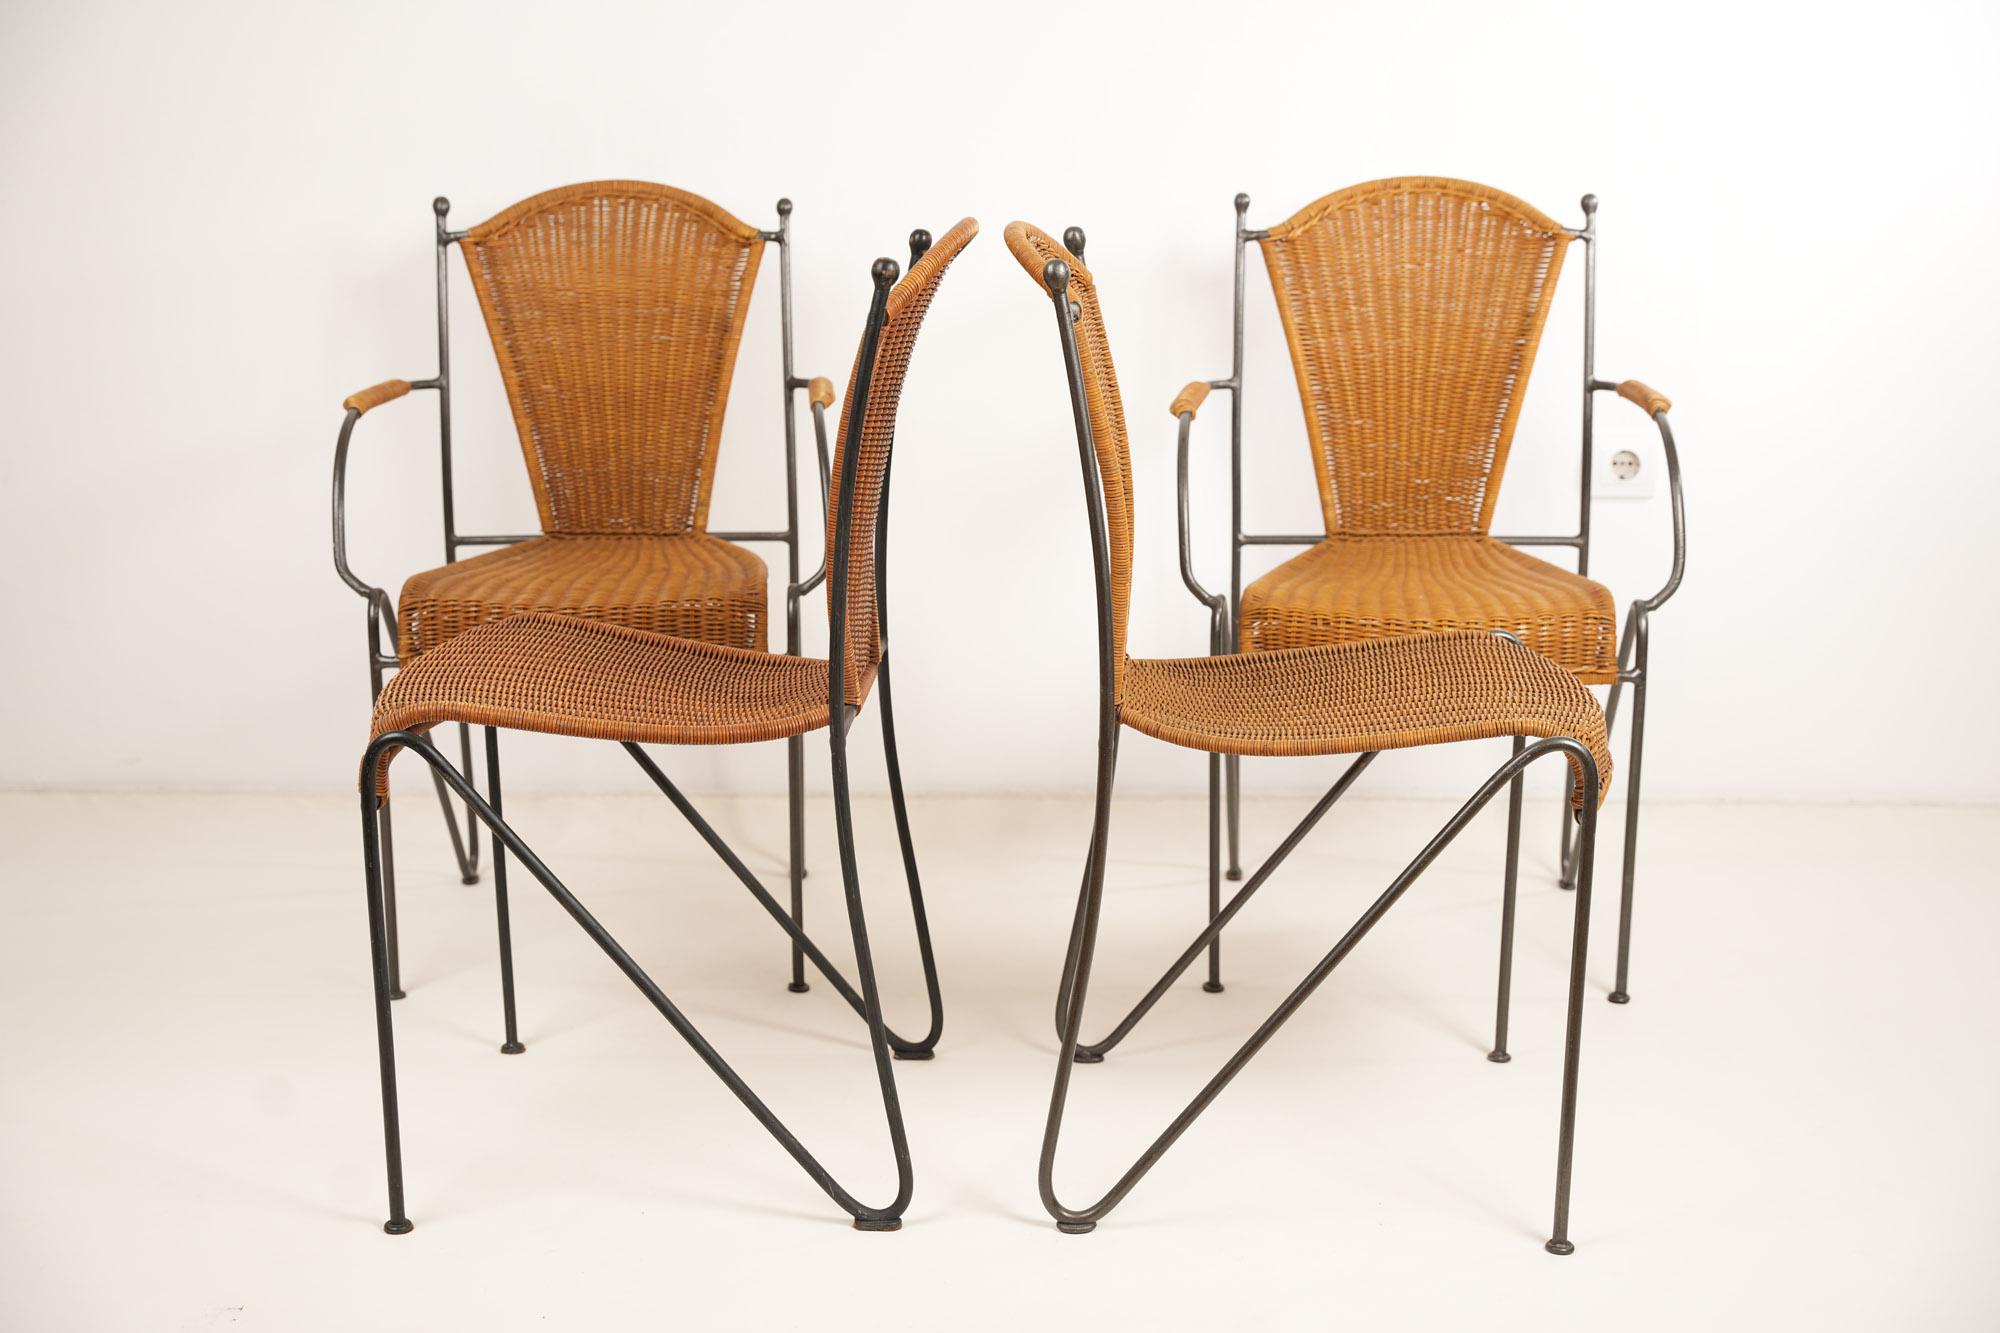 Frederic Weinberg Wicker and Iron Chairs 1950s